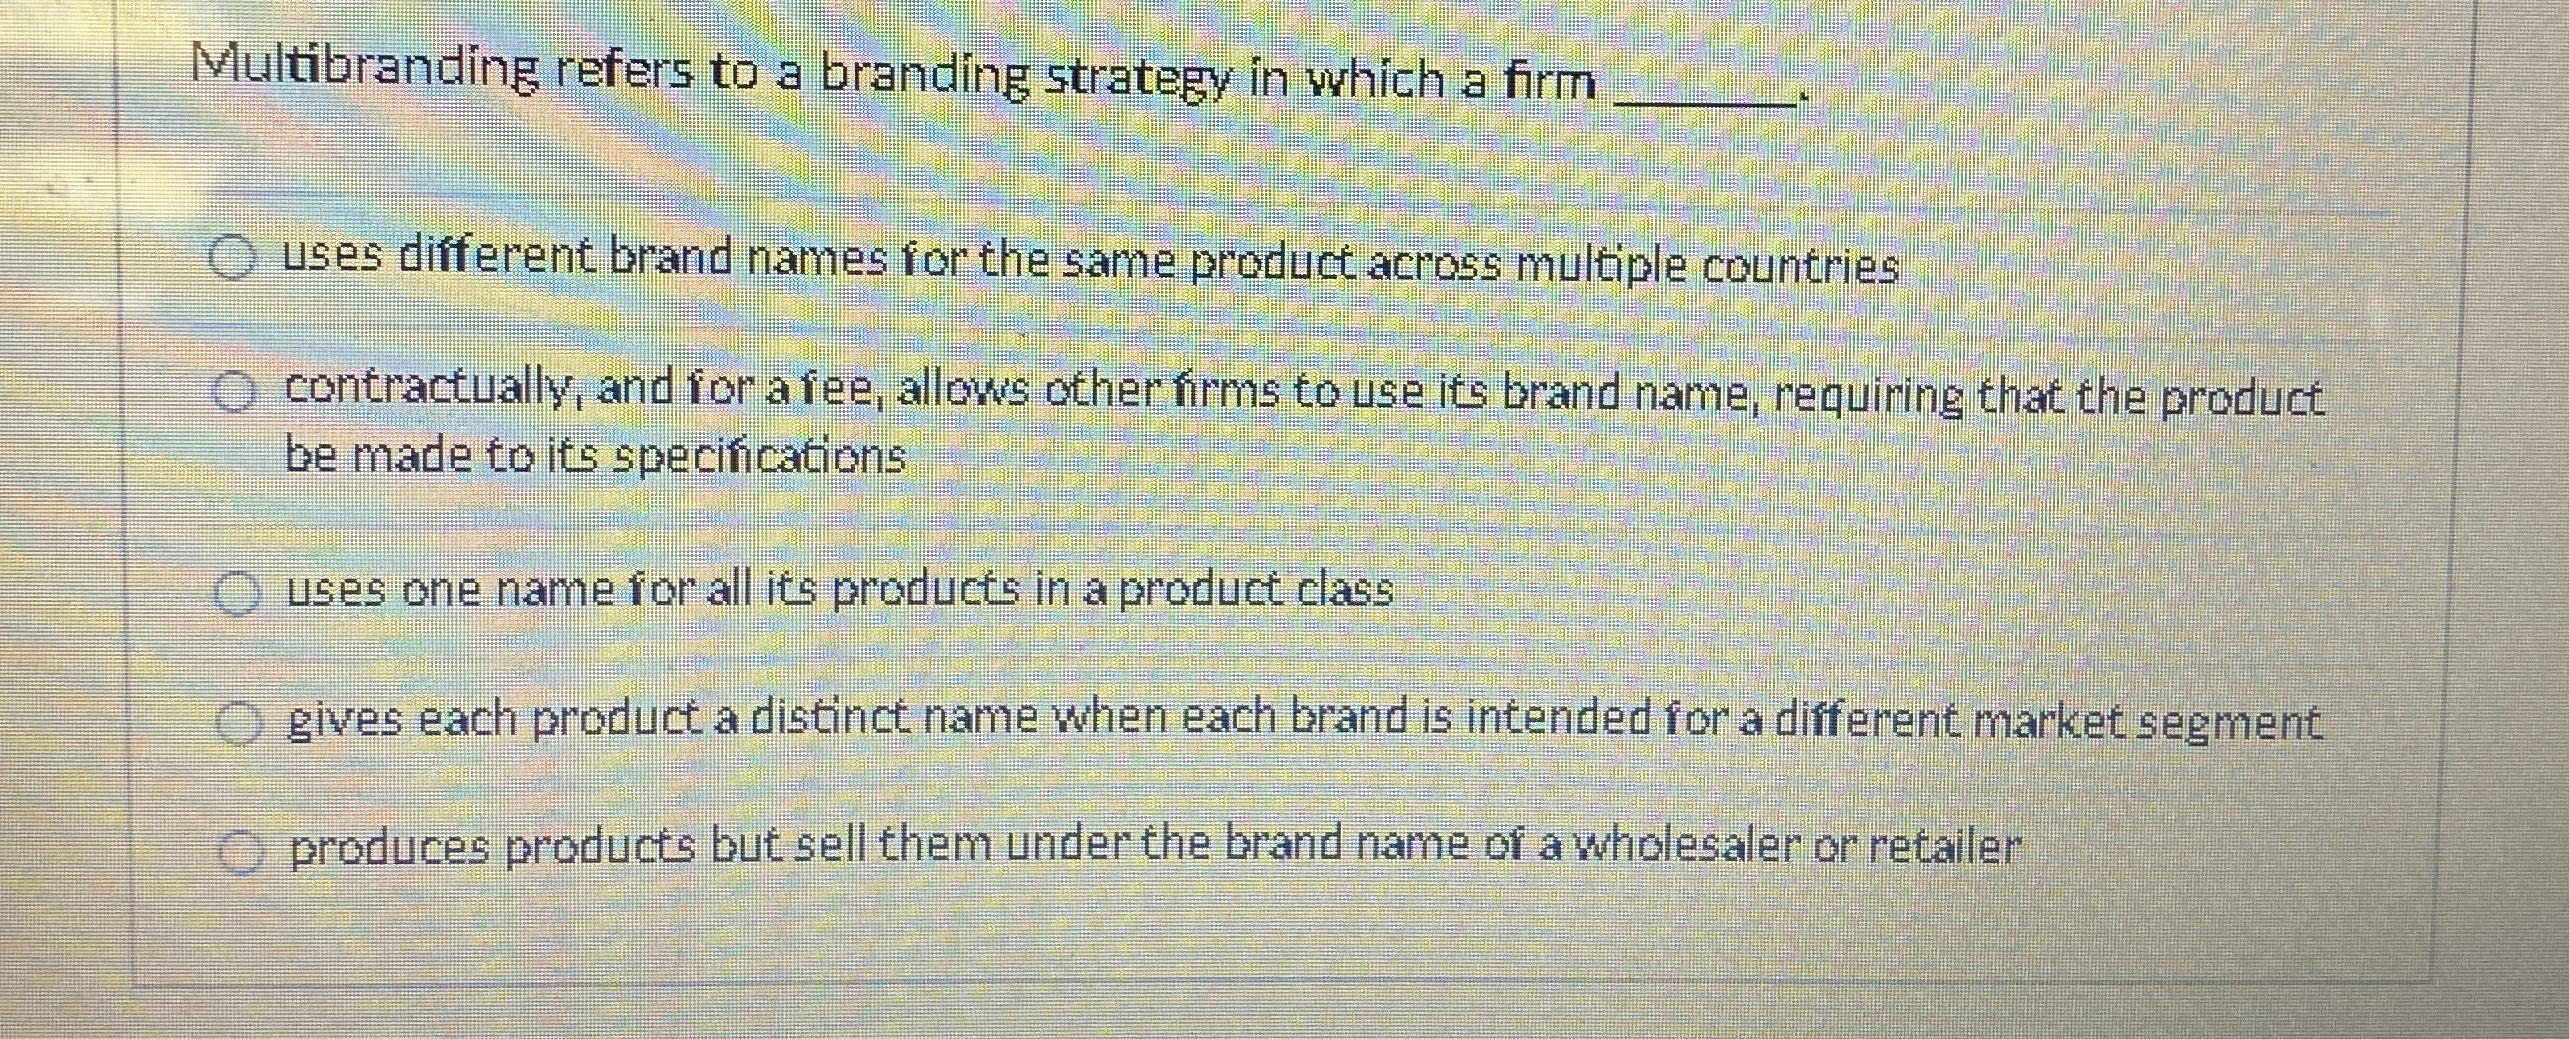 Multibranding refers to a branding strategy in which a firm uses different brand names for the same product